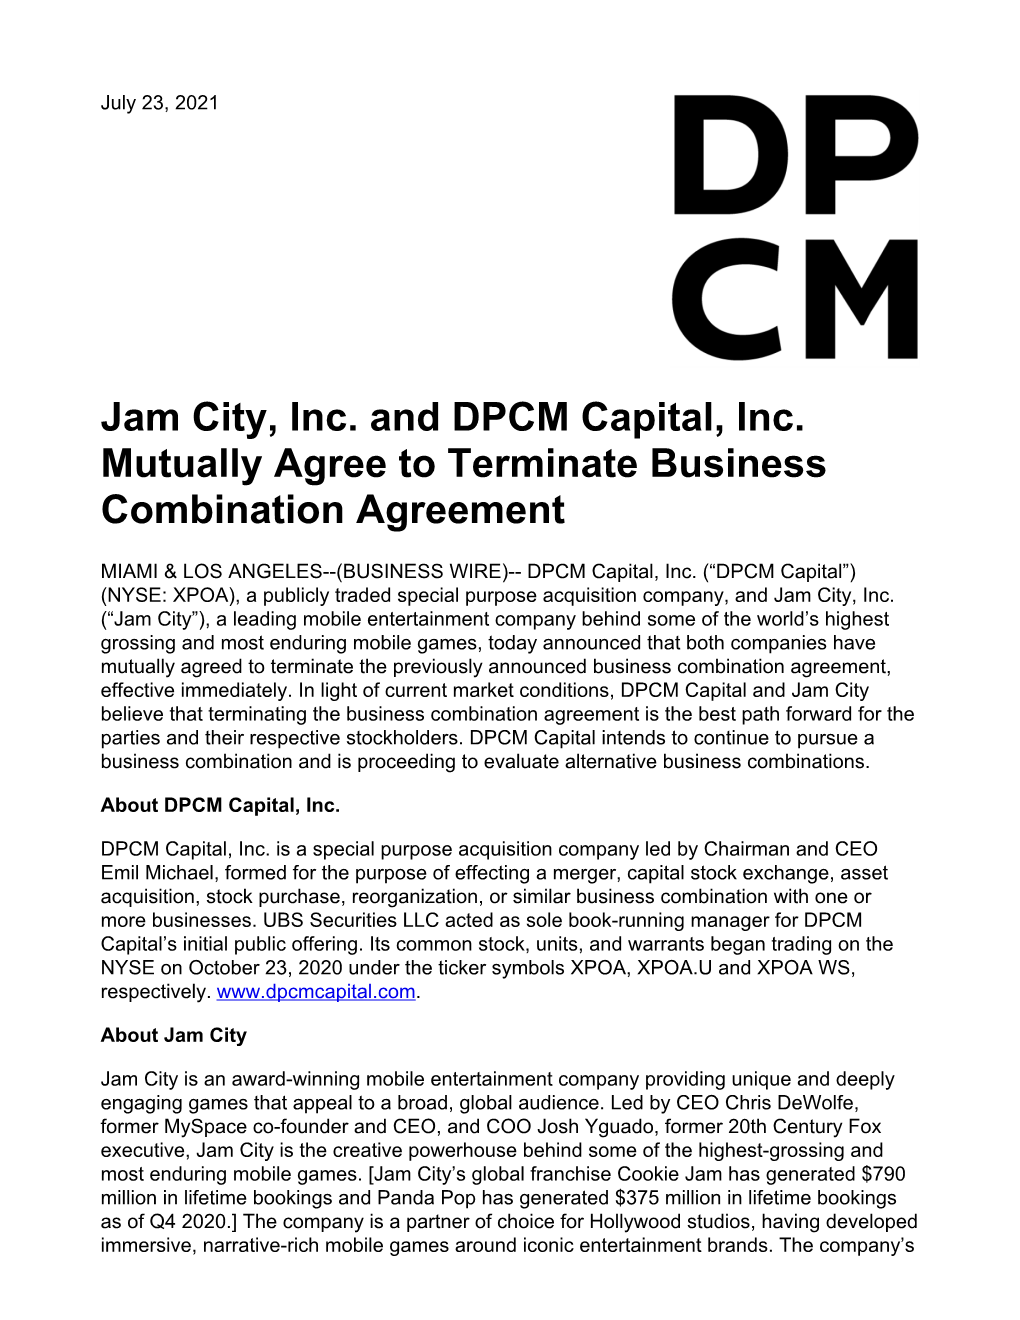 Jam City, Inc. and DPCM Capital, Inc. Mutually Agree to Terminate Business Combination Agreement